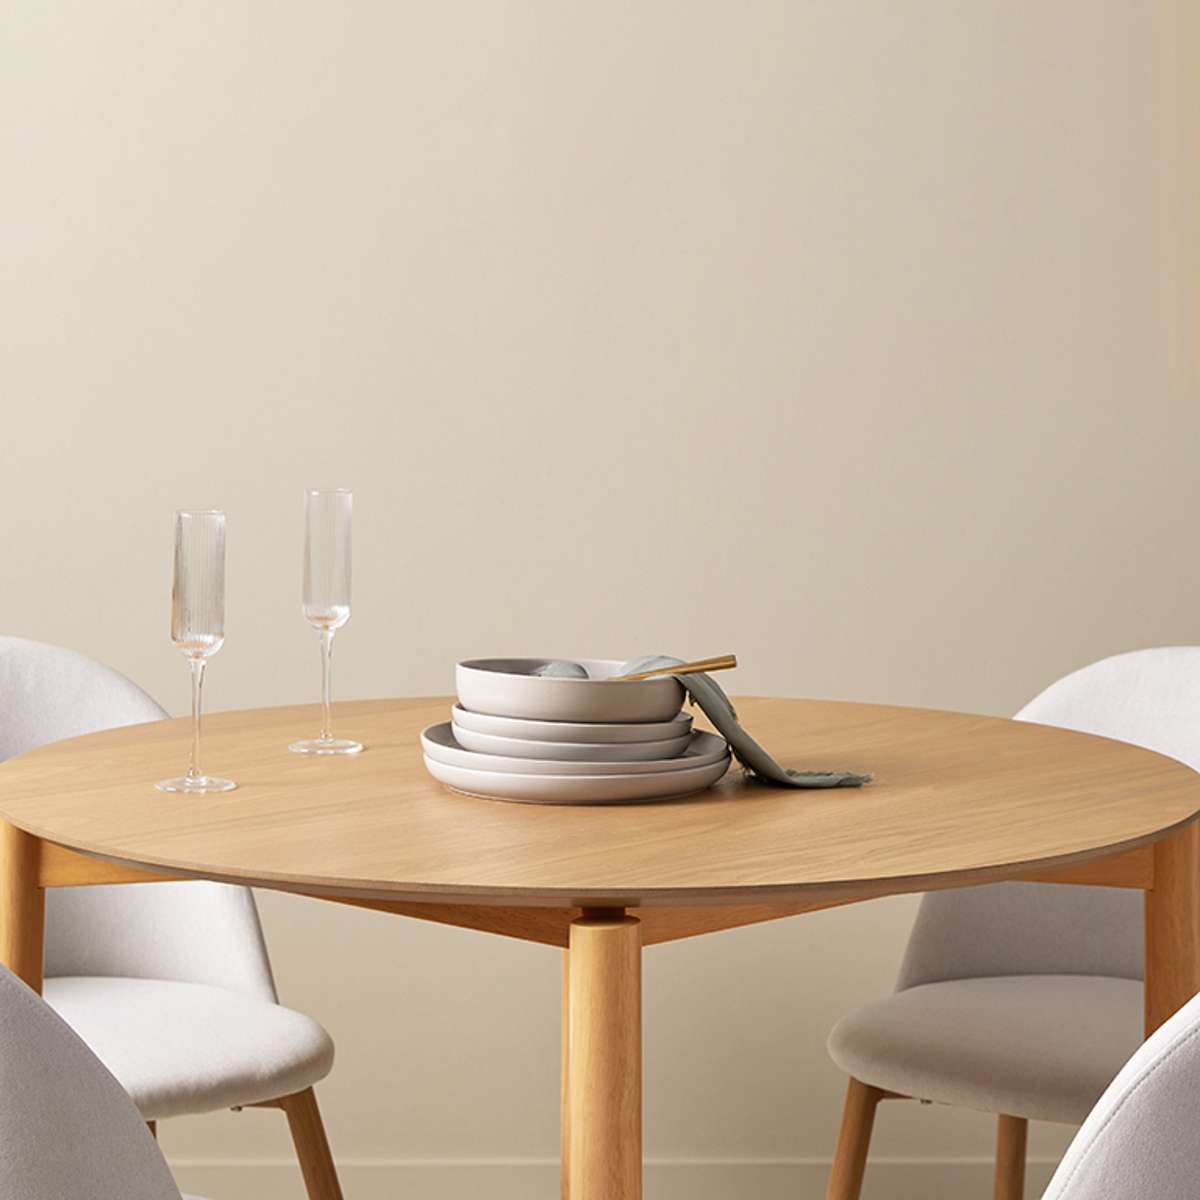 Leon 4 Seater Dining Table - Natural